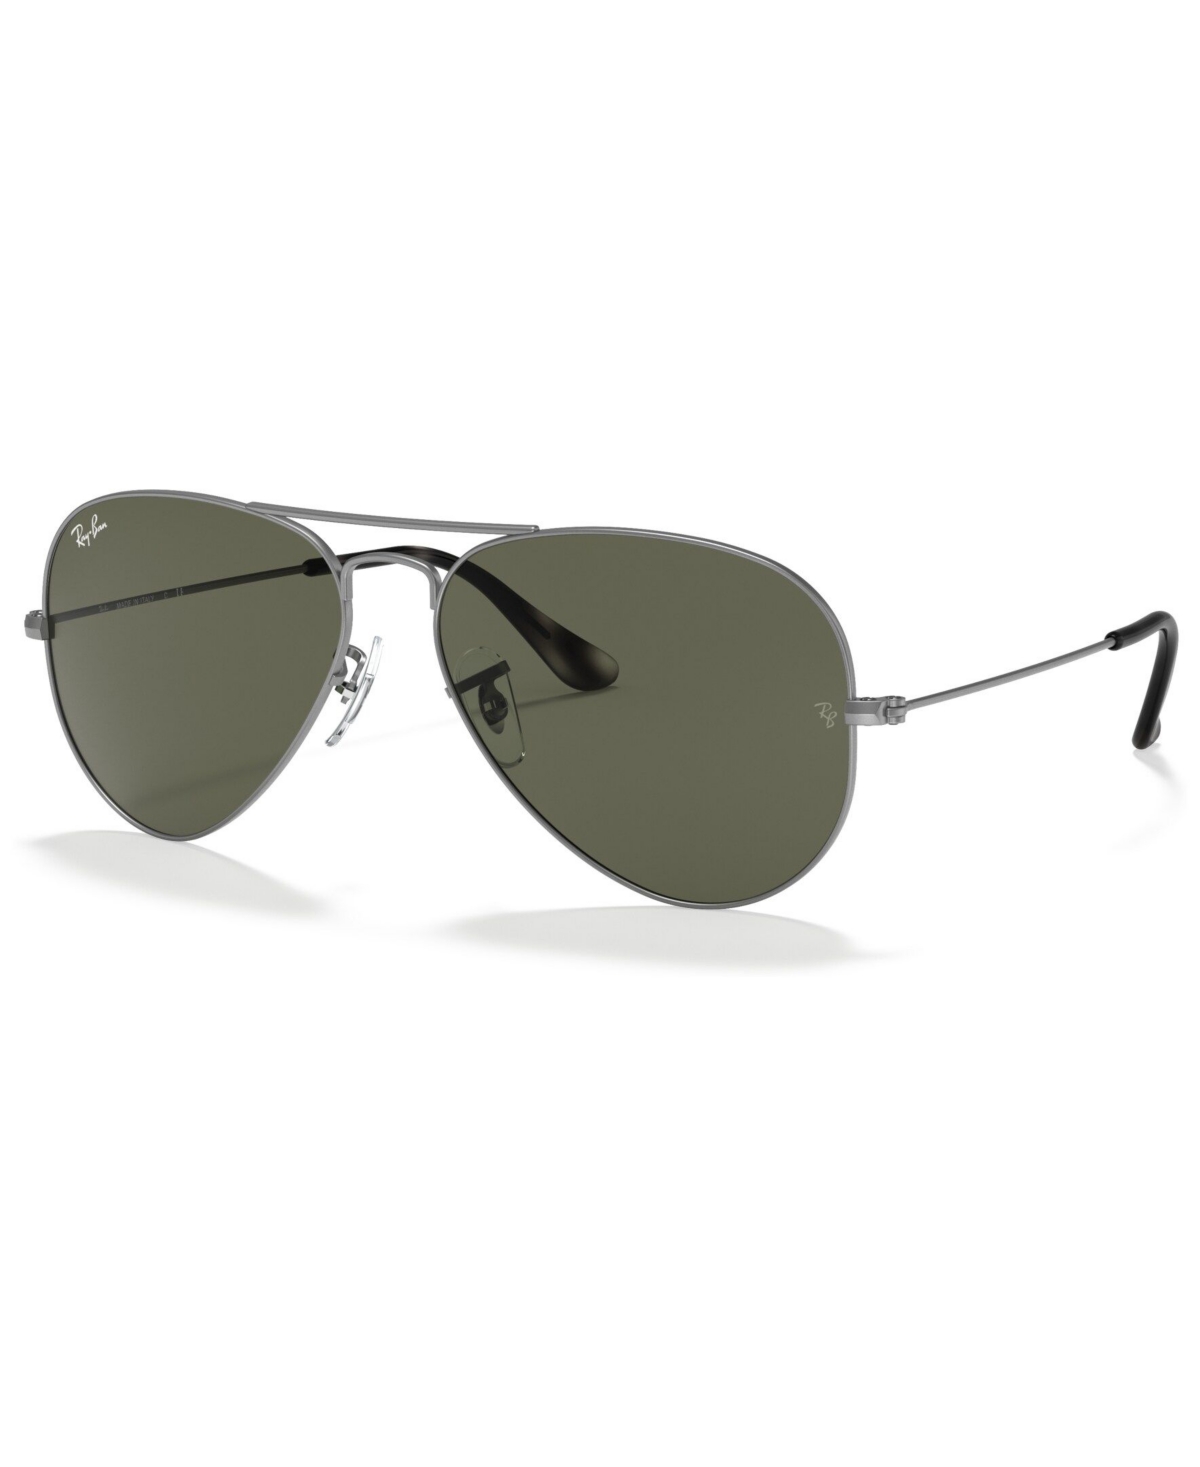 Ray Ban Unisex Sunglasses, Aviator Large Metal Rb3025 In Sand Trasparent Grey,green